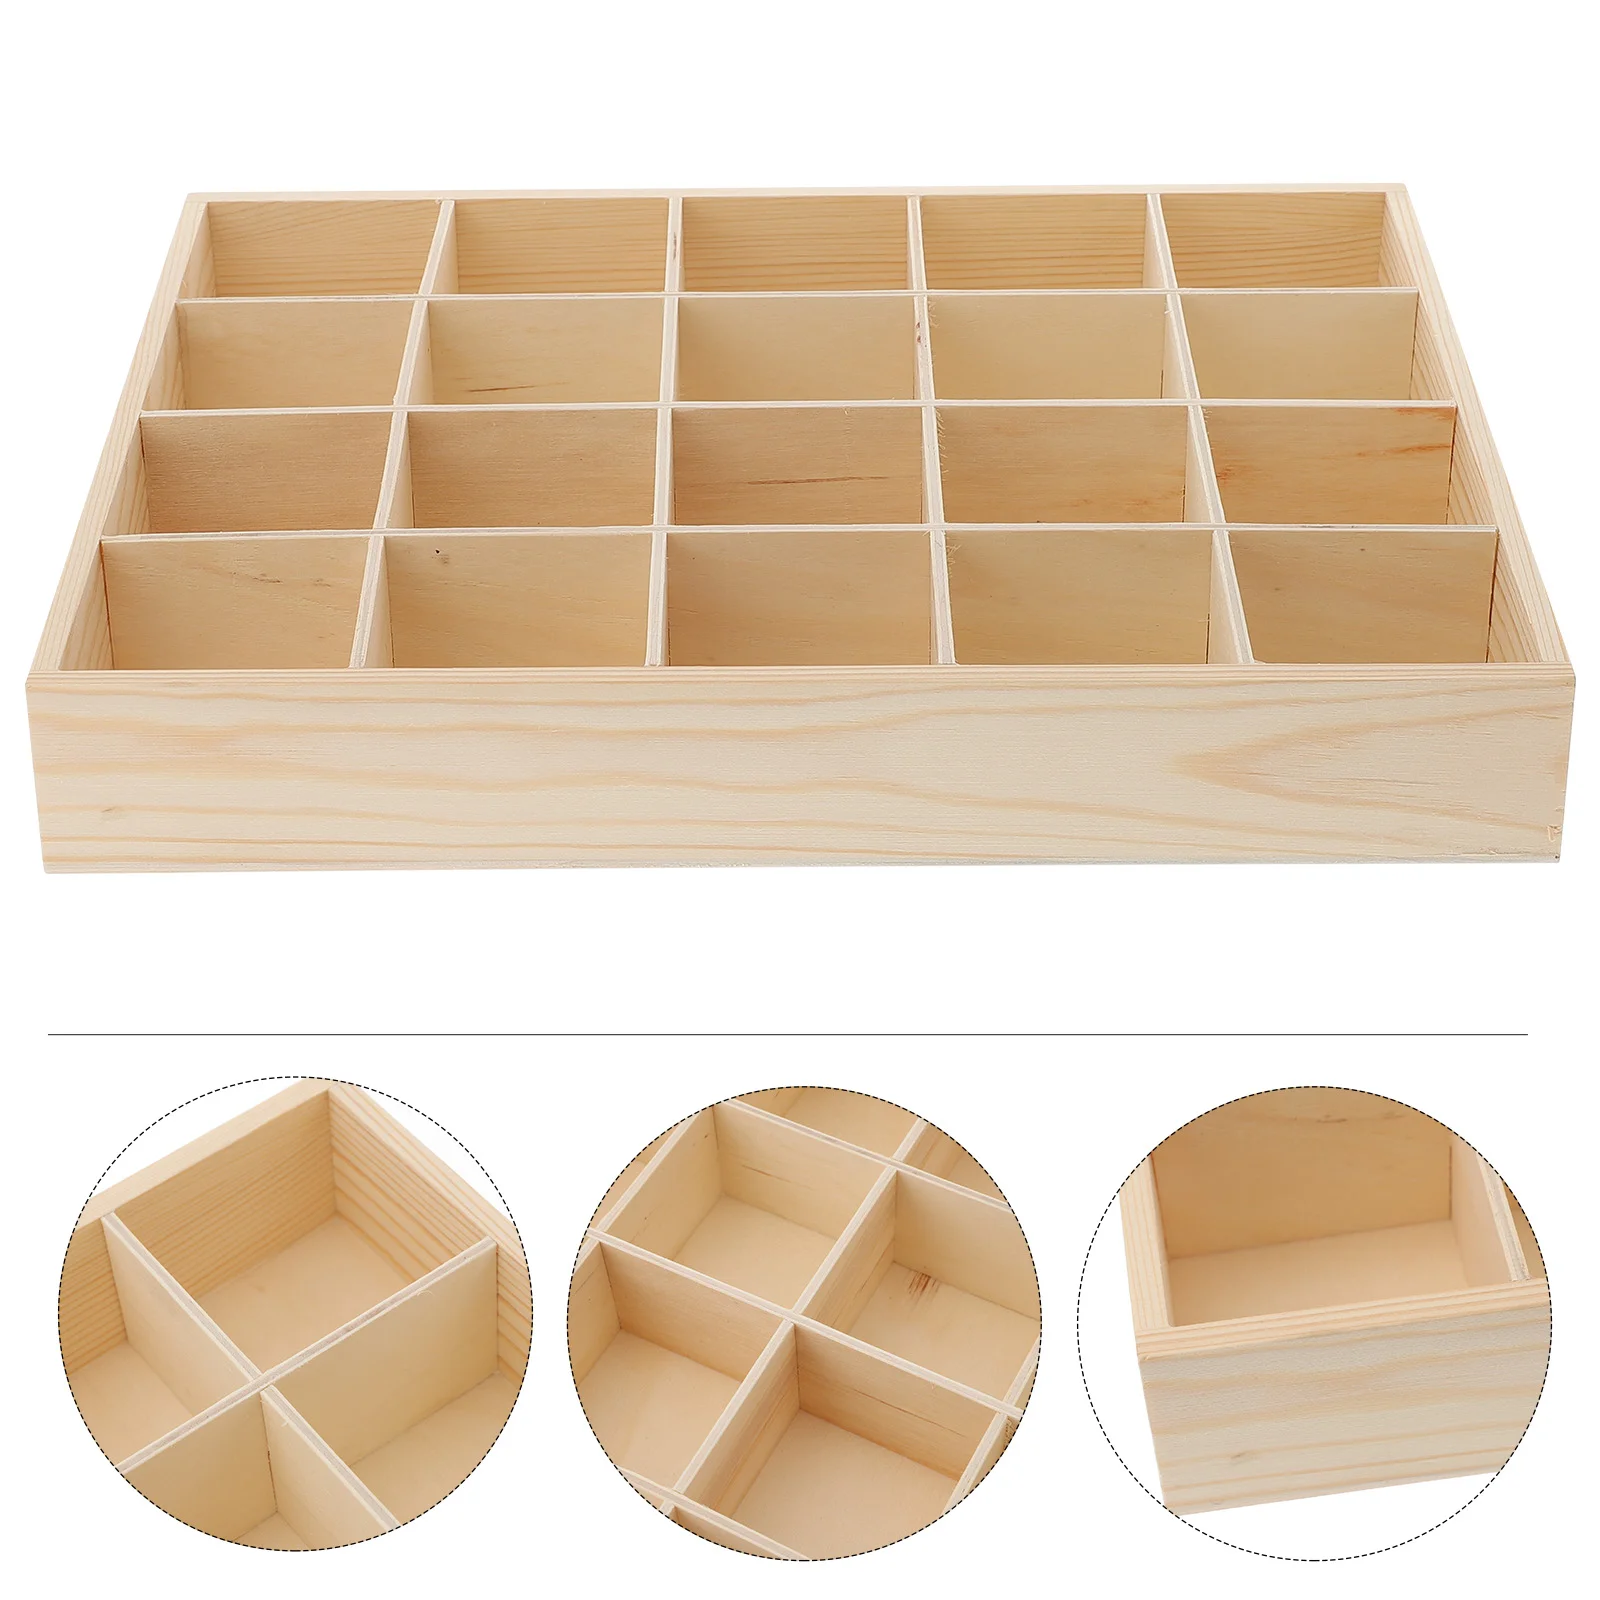 

Wooden Desktop Organizer Drawer Box 20 Compartments Solution Storage Cabinet For Office Supplies, Bathroom Toiletries Products